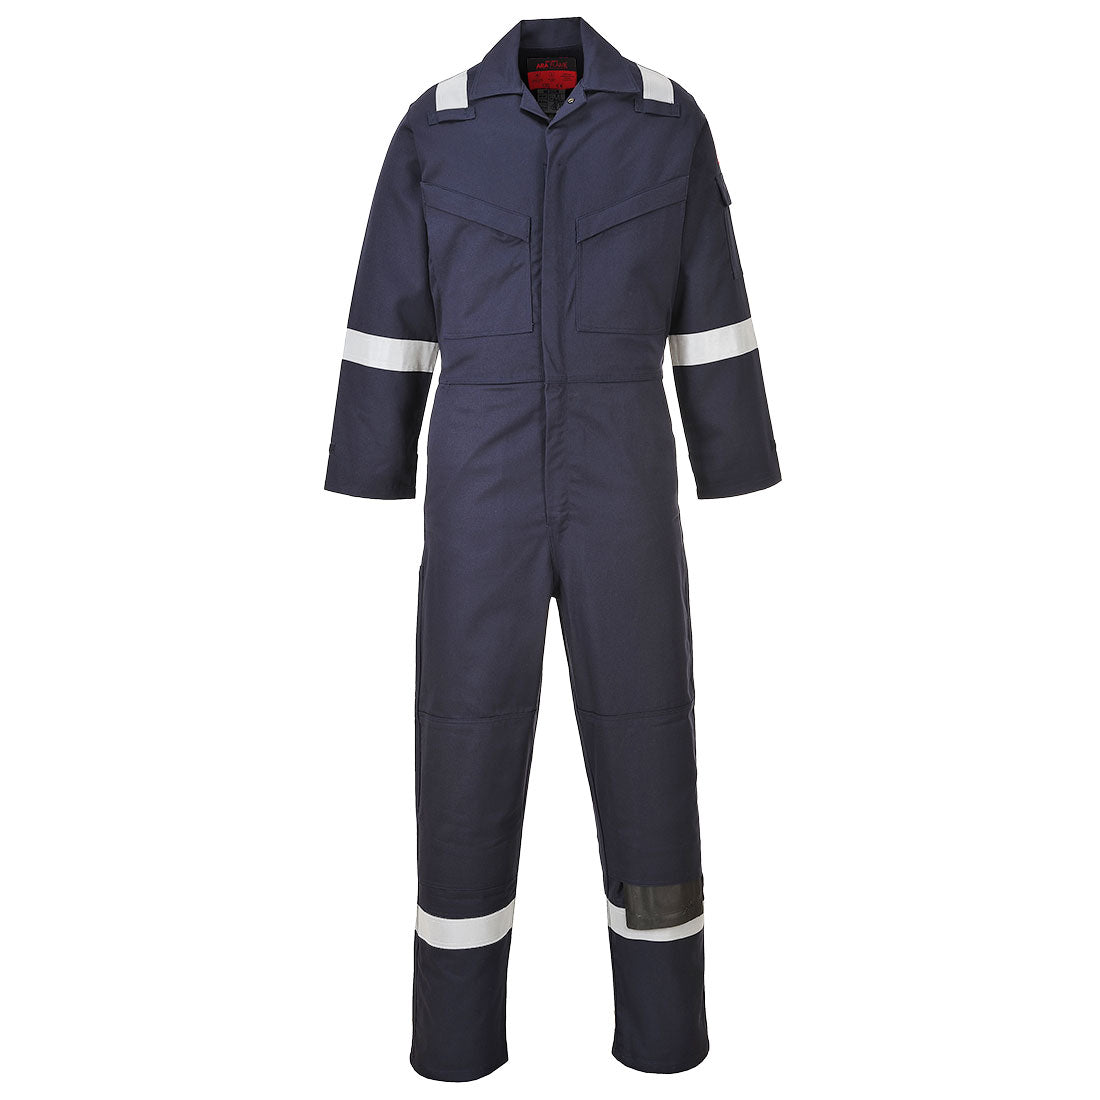 Araflame™ Light and Resistant Fireproof Coverall